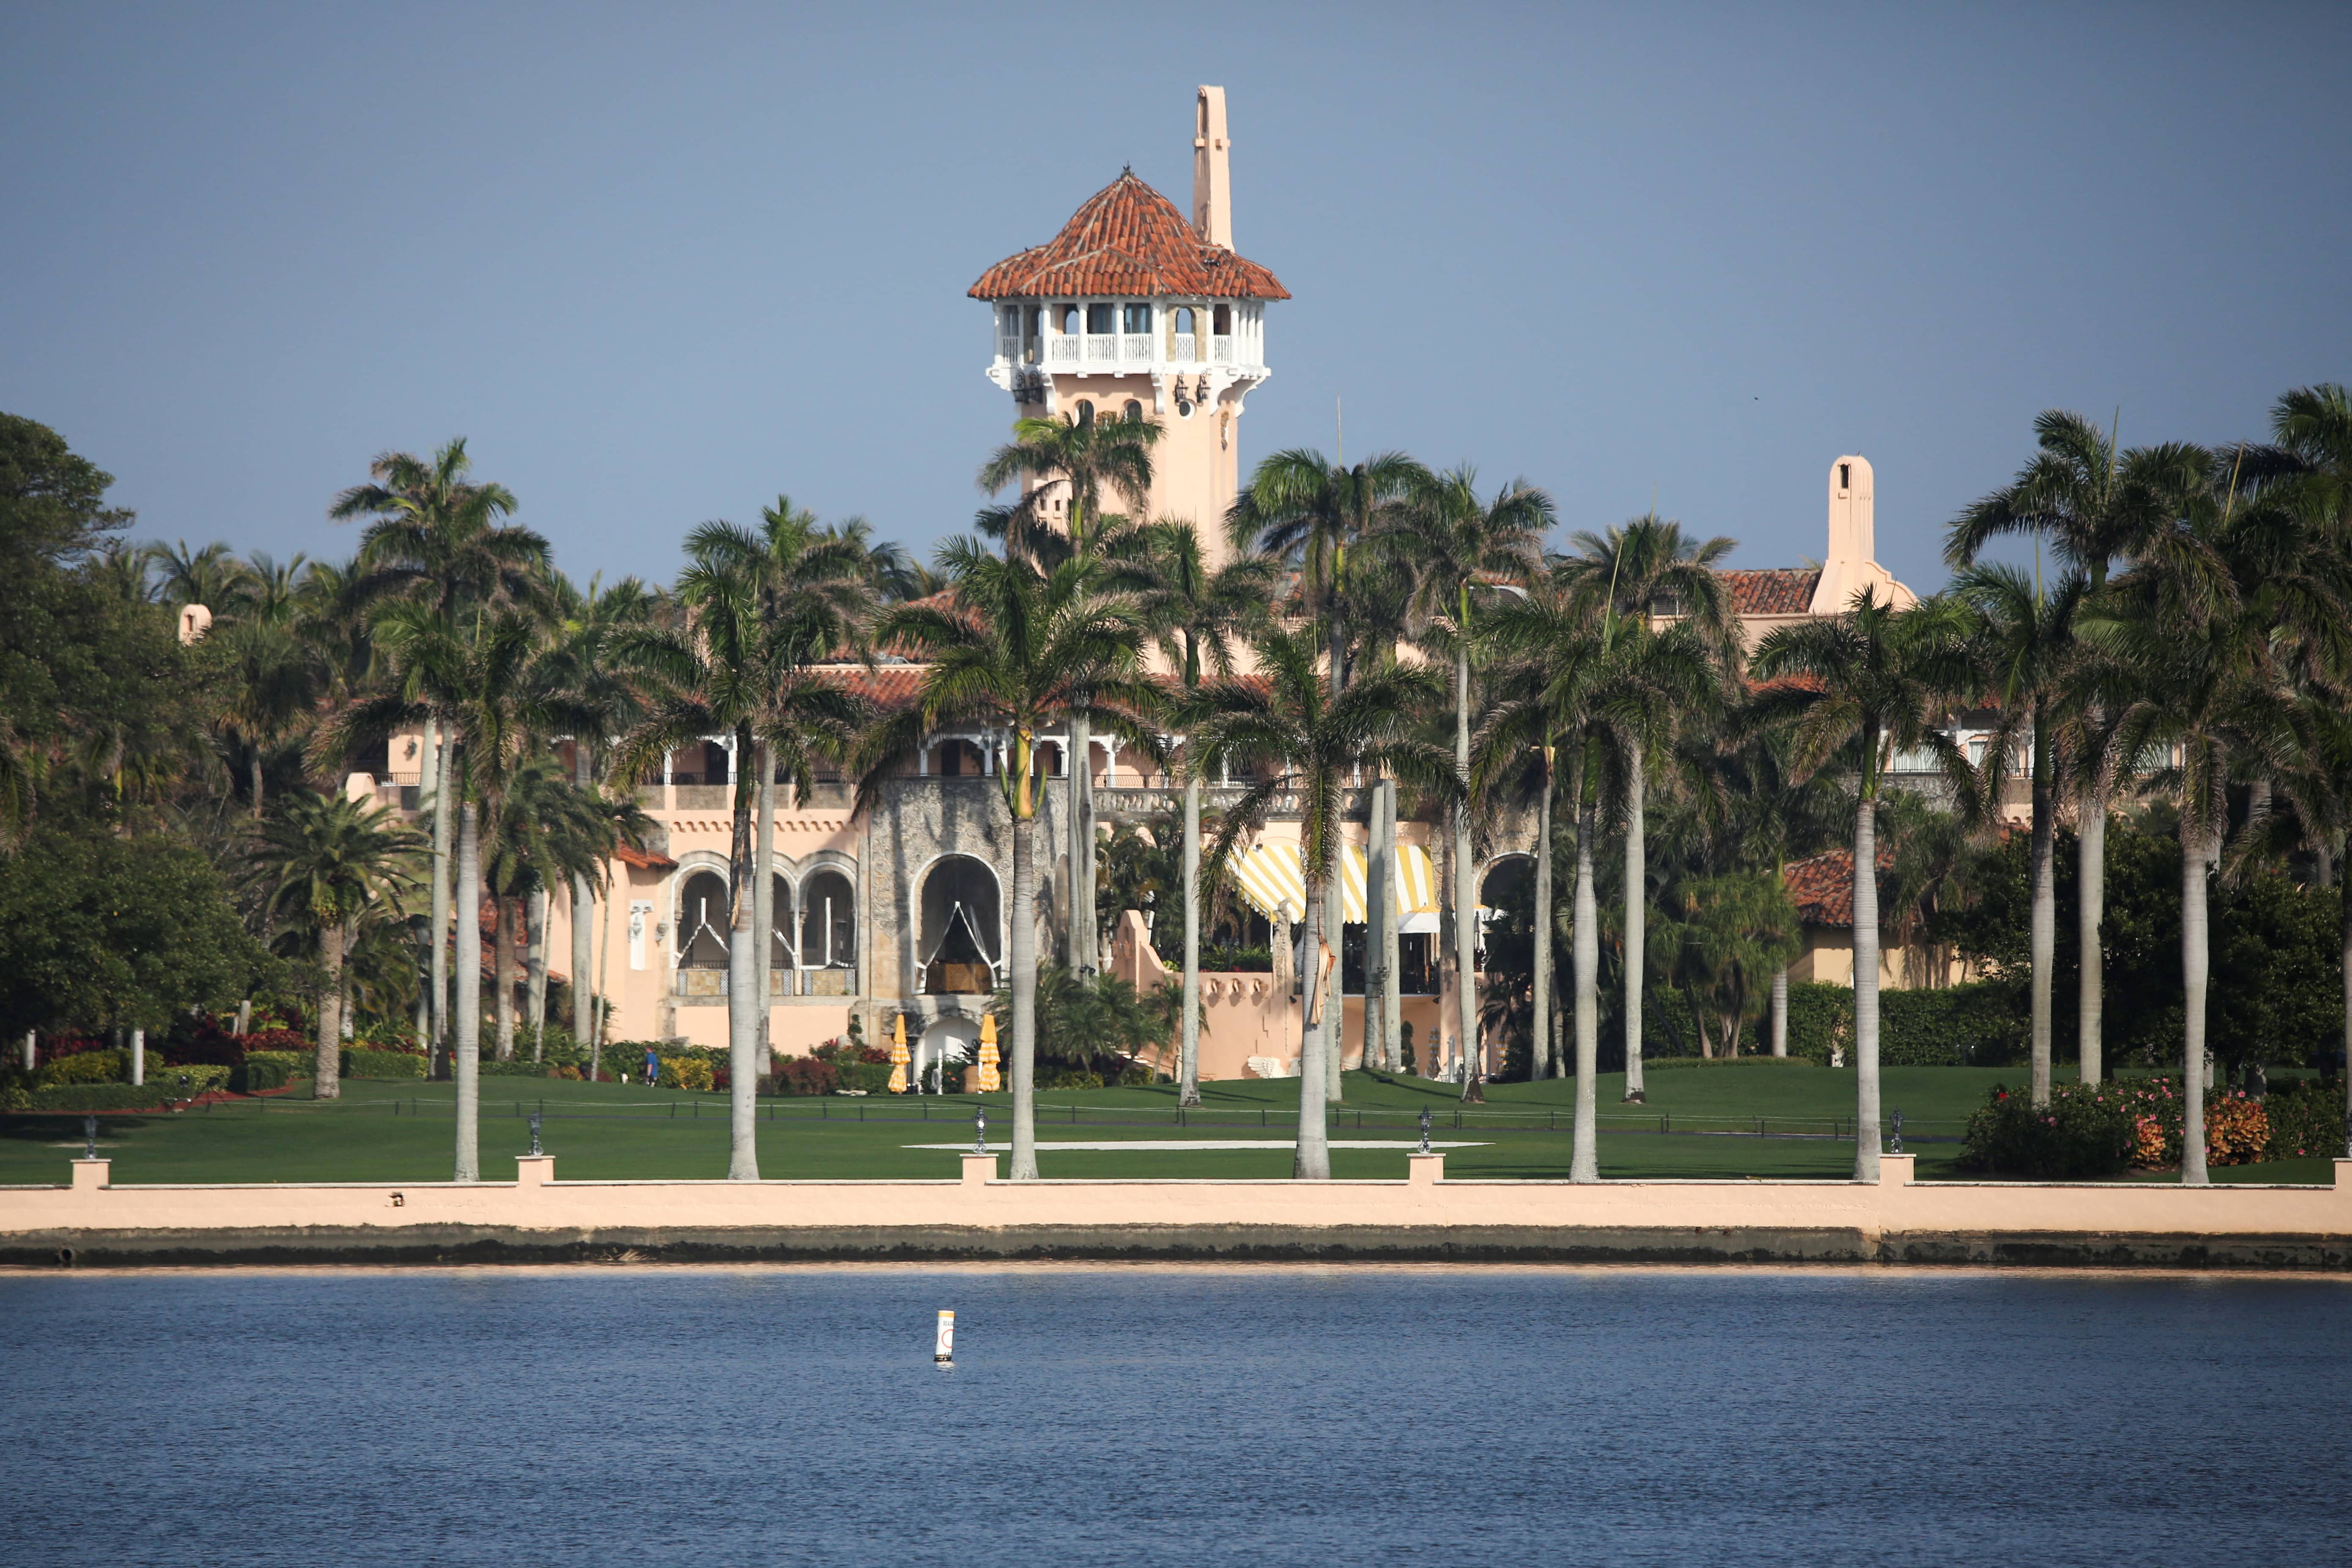 file-photo-former-u-s-president-donald-trumps-mar-a-lago-resort-is-seen-in-palm-beach